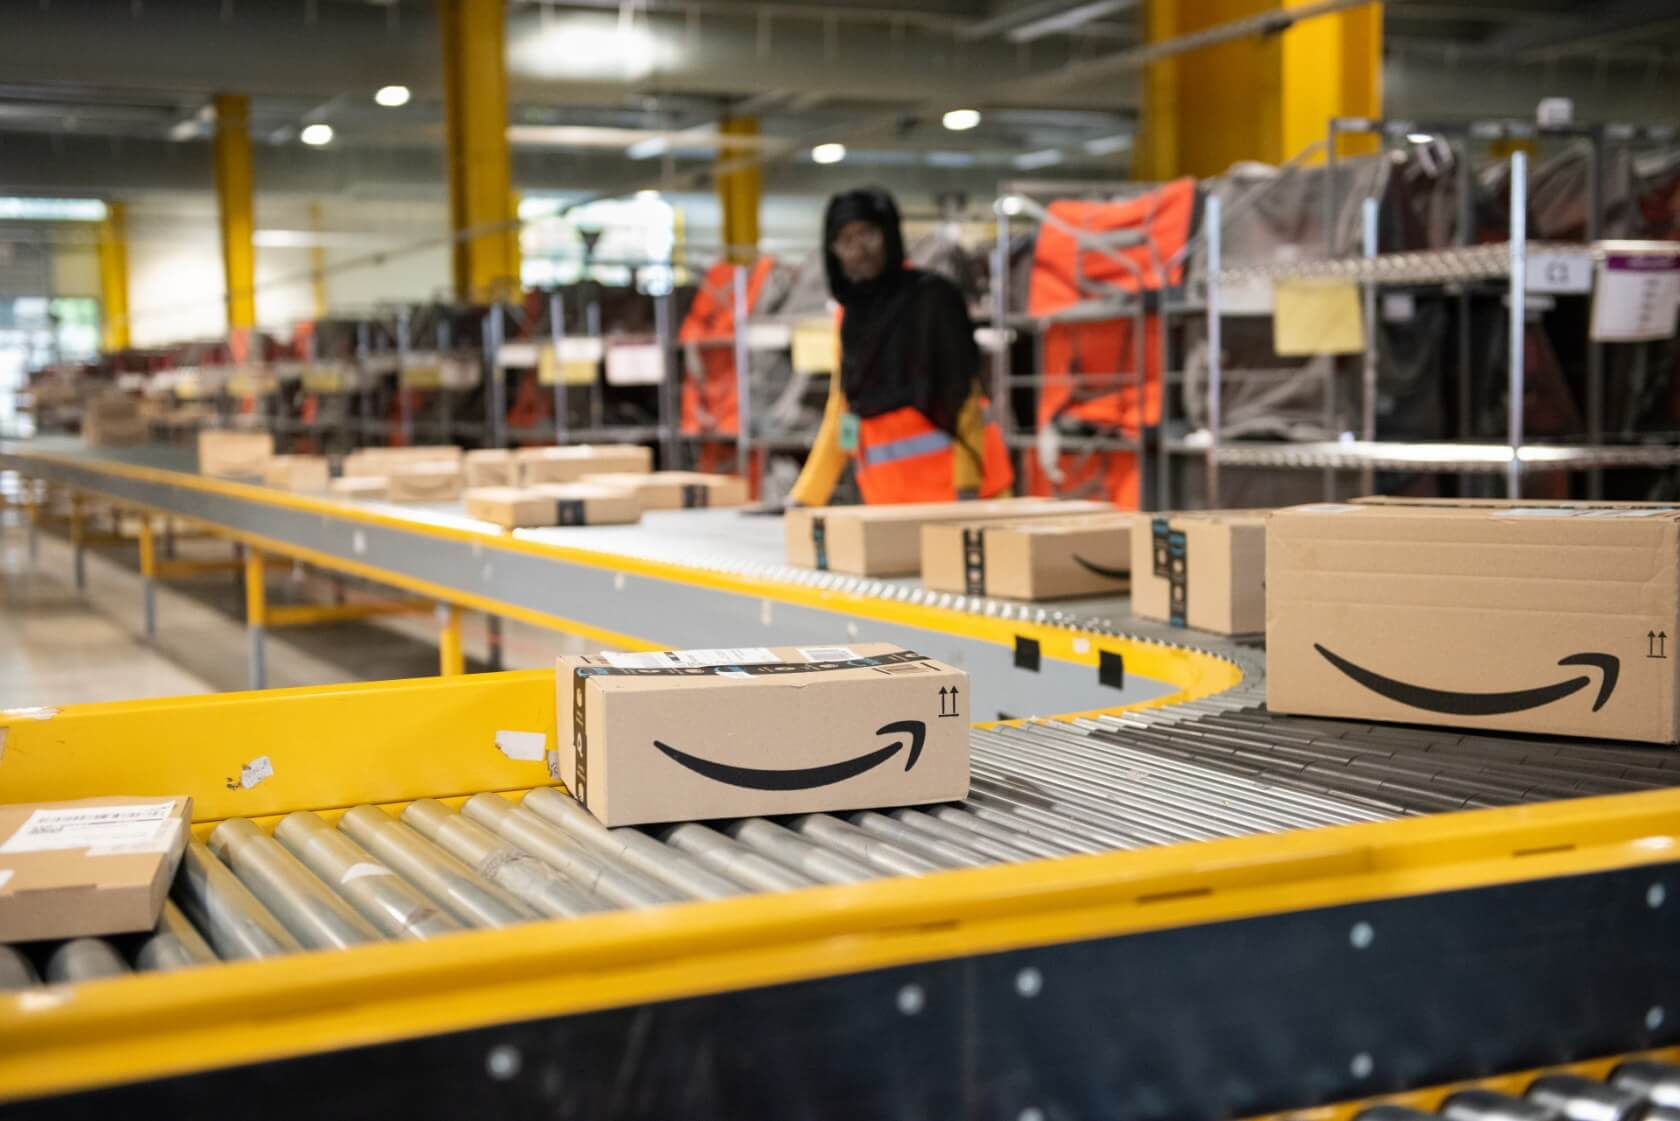 Amazon must continue limiting shipments to the essentials in France, court orders